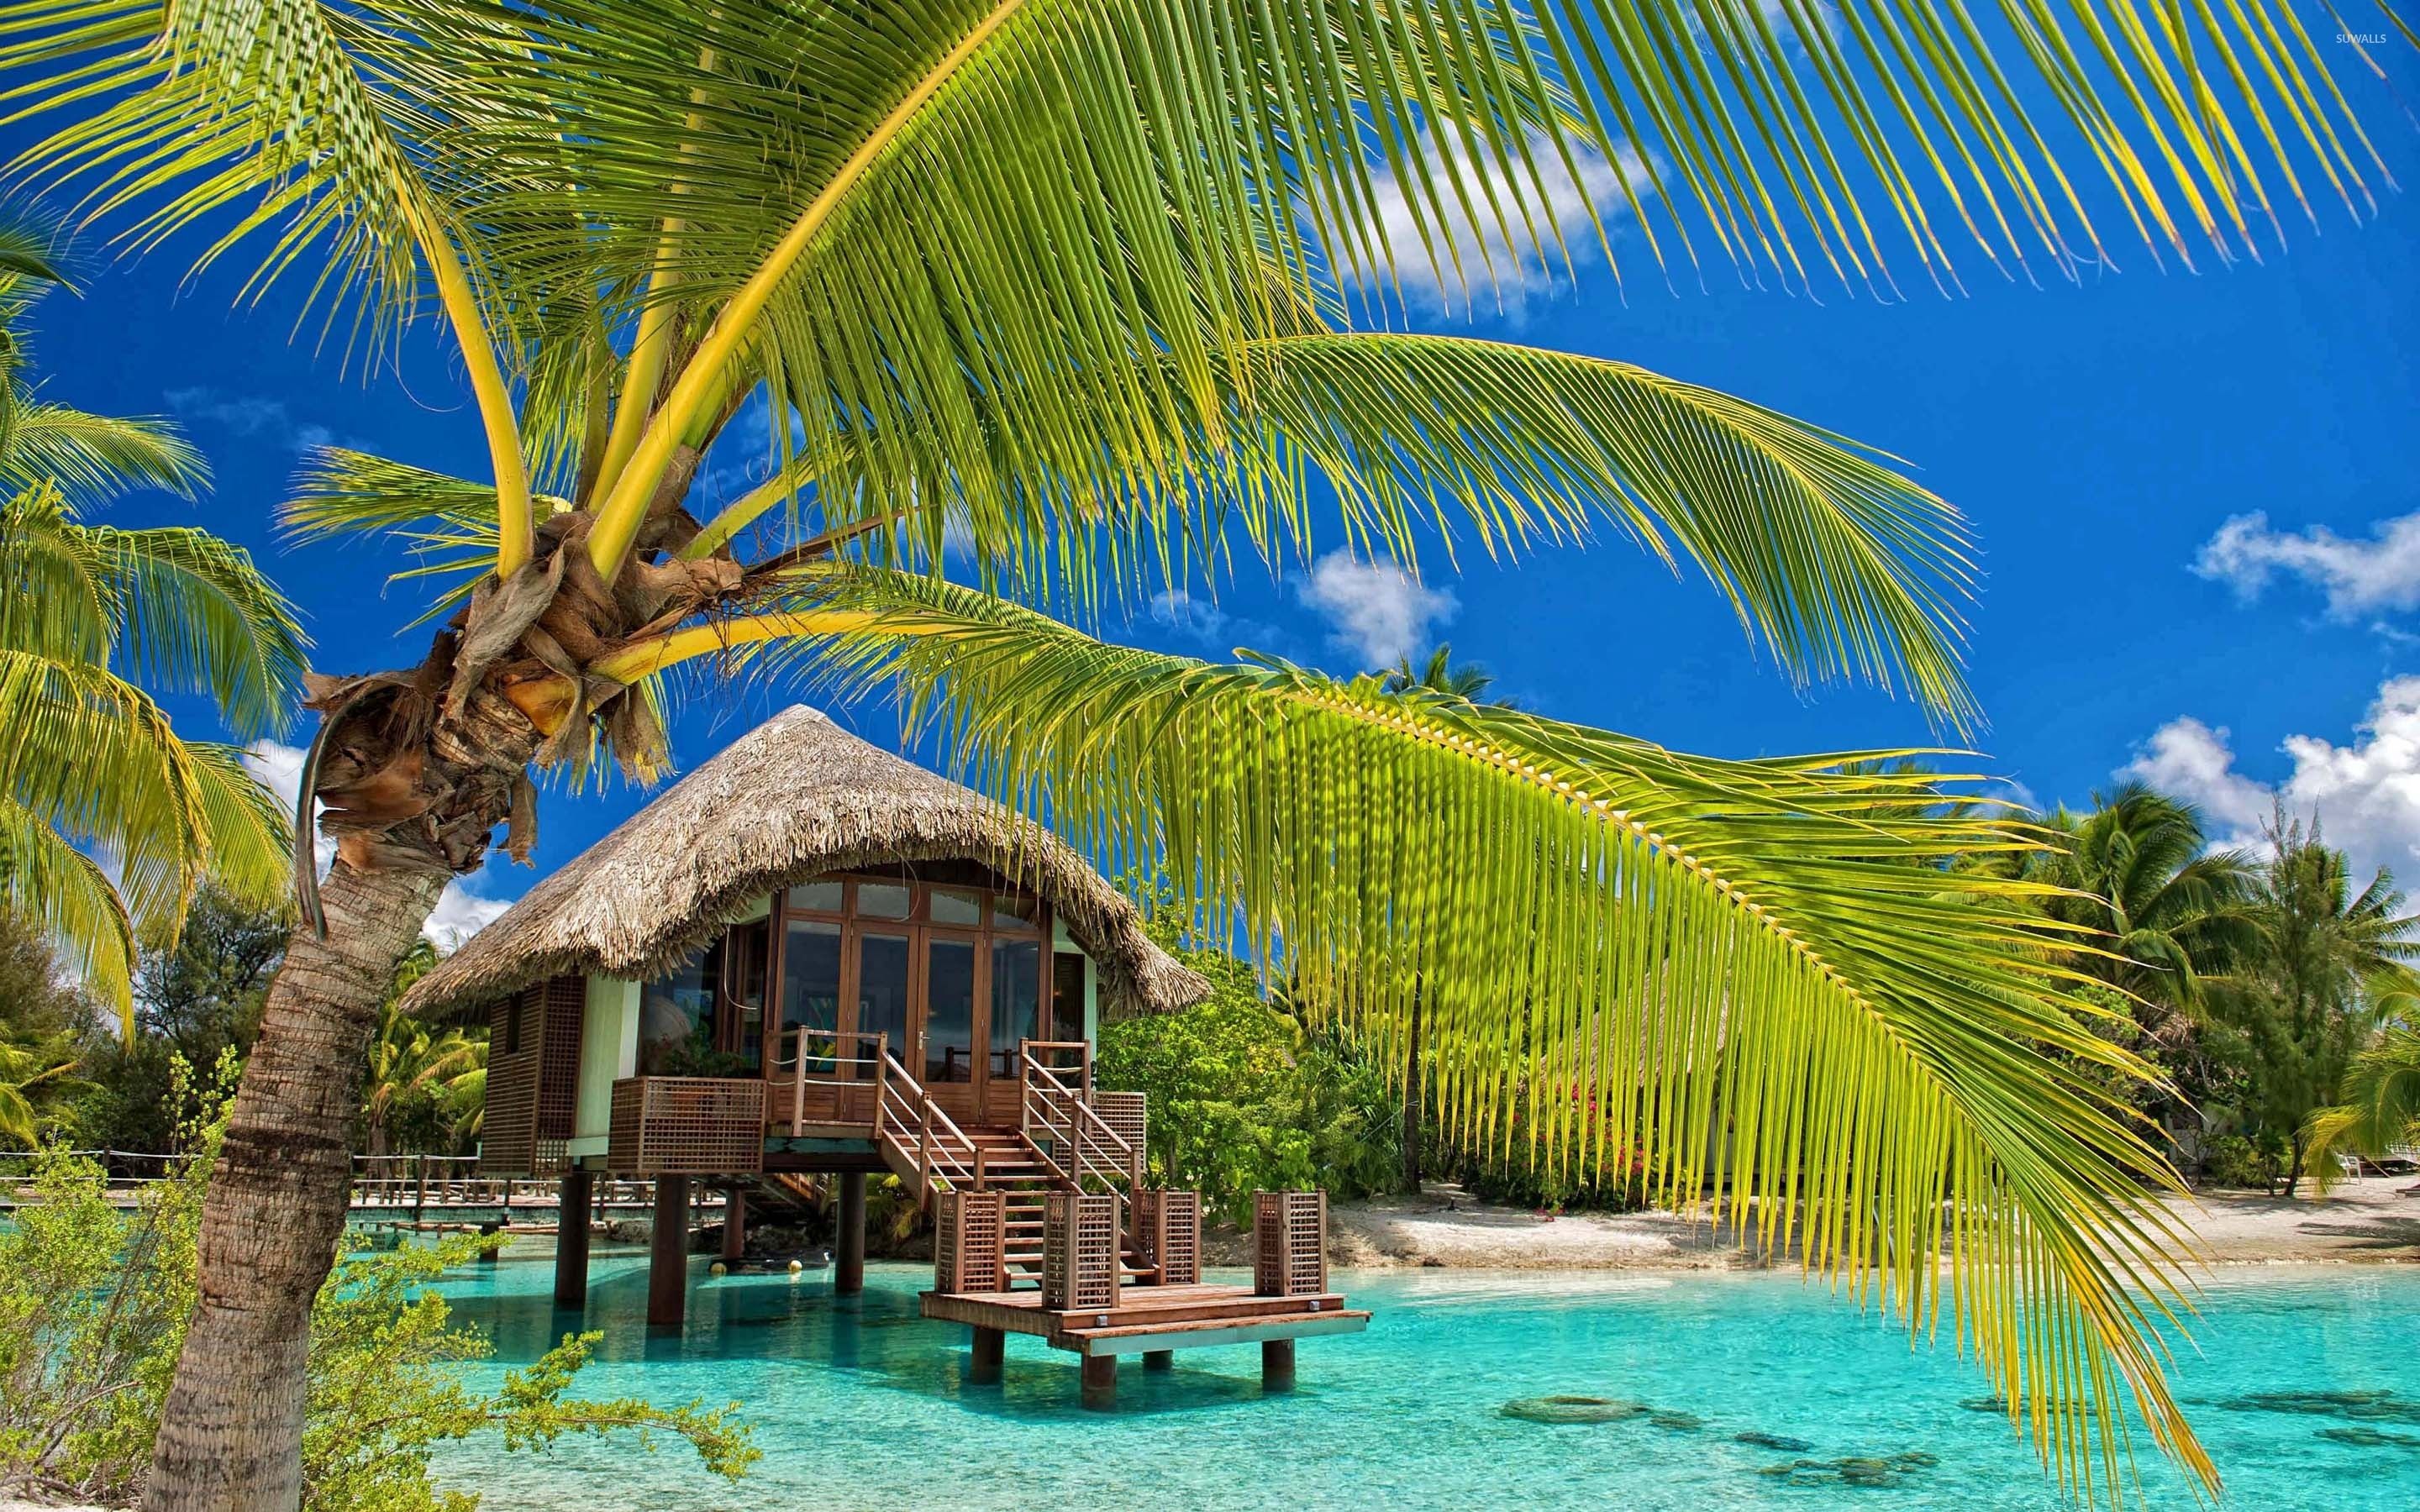 Hut in the water by the palm trees wallpaper wallpaper